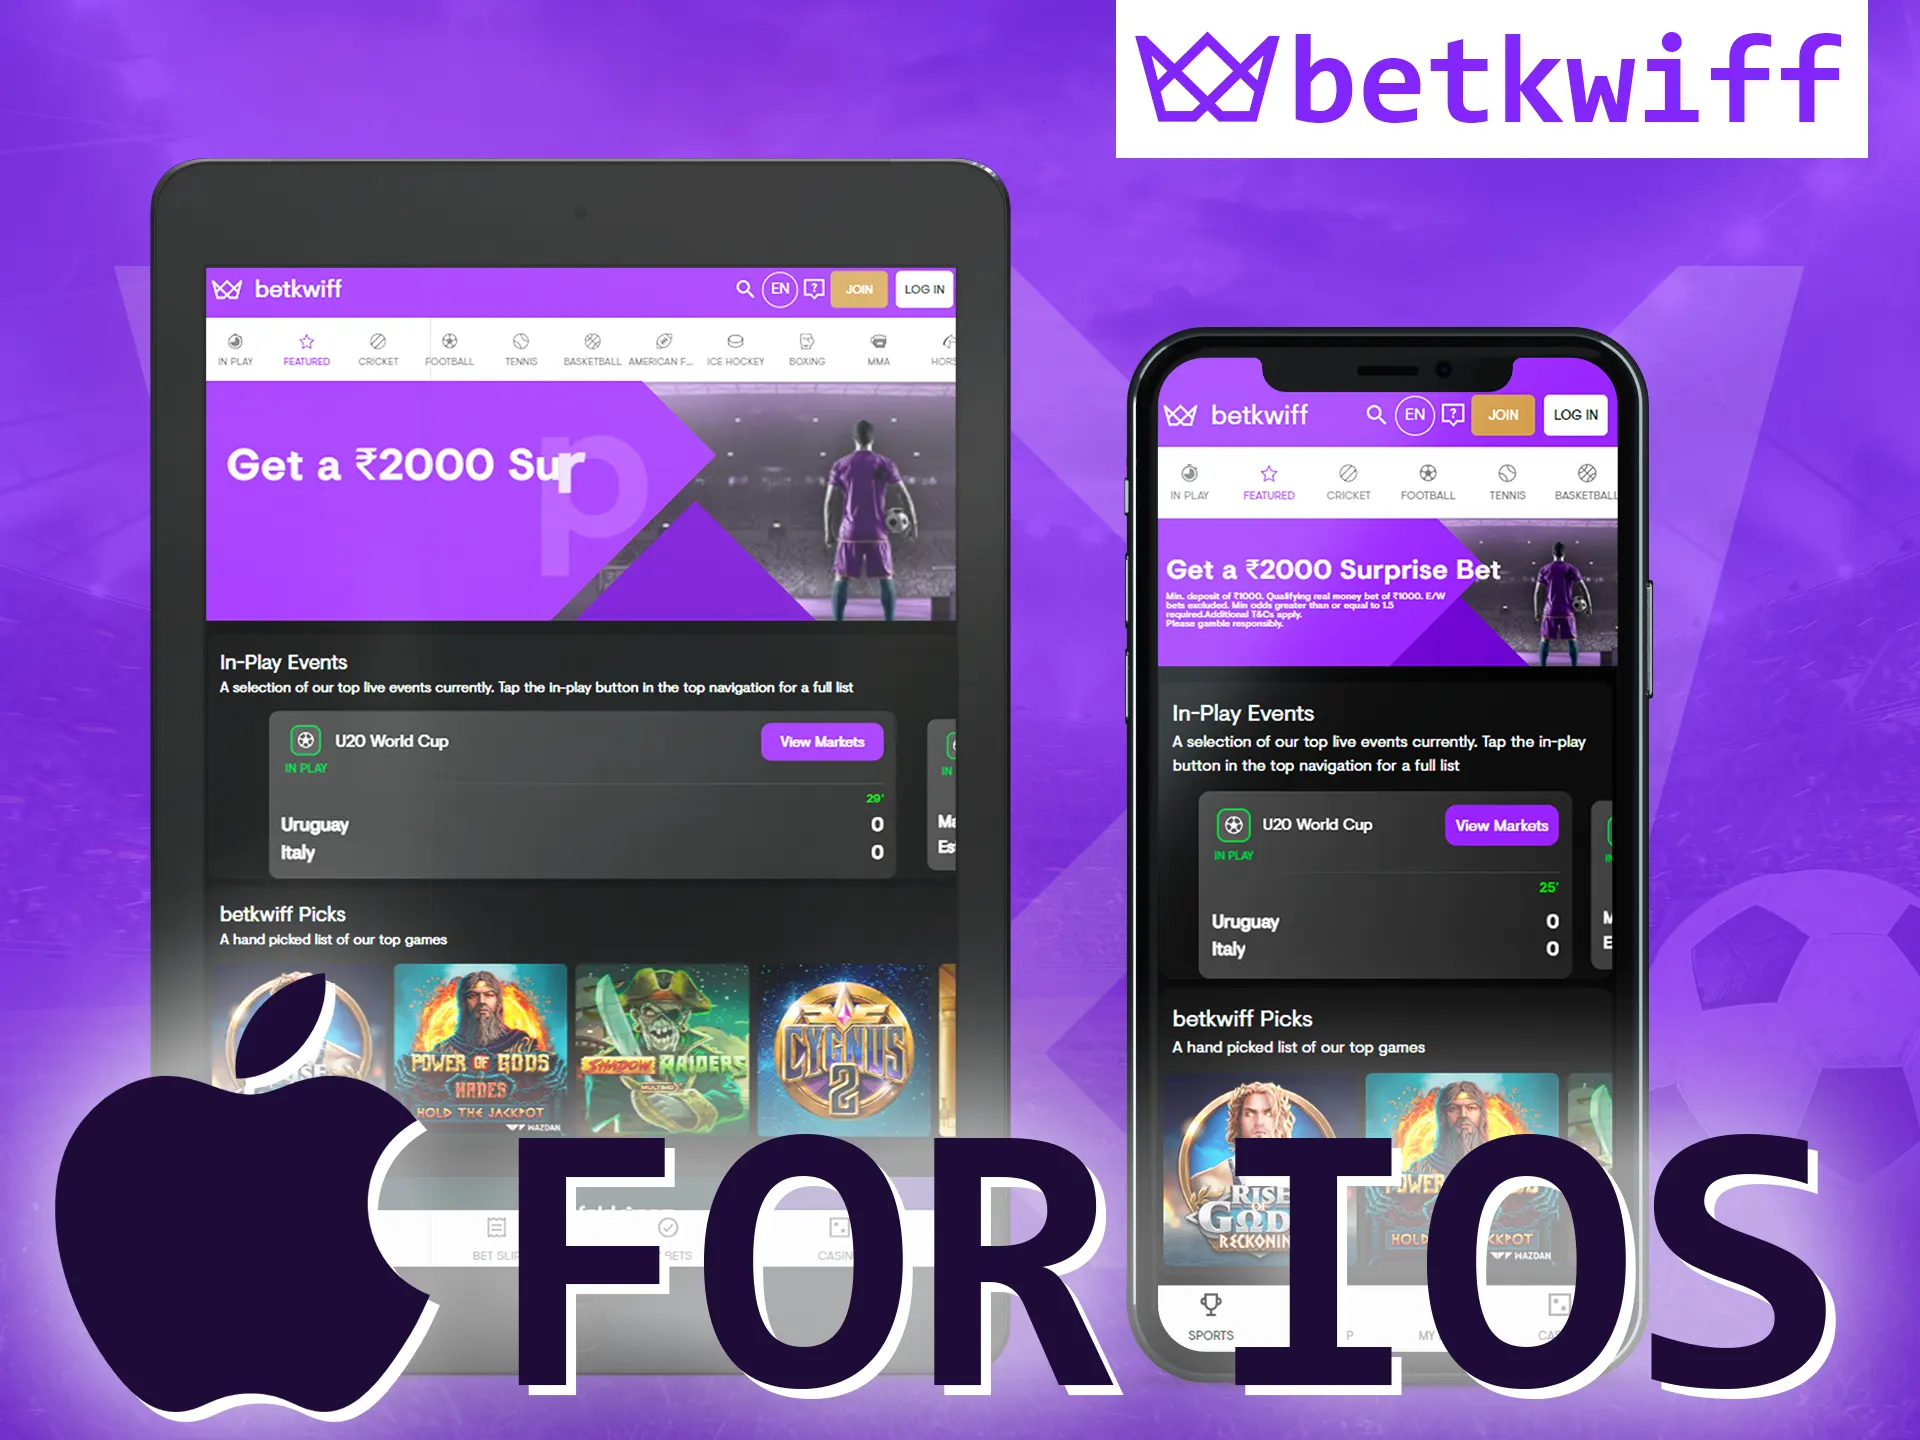 Install the Betkwiff app for iOS.